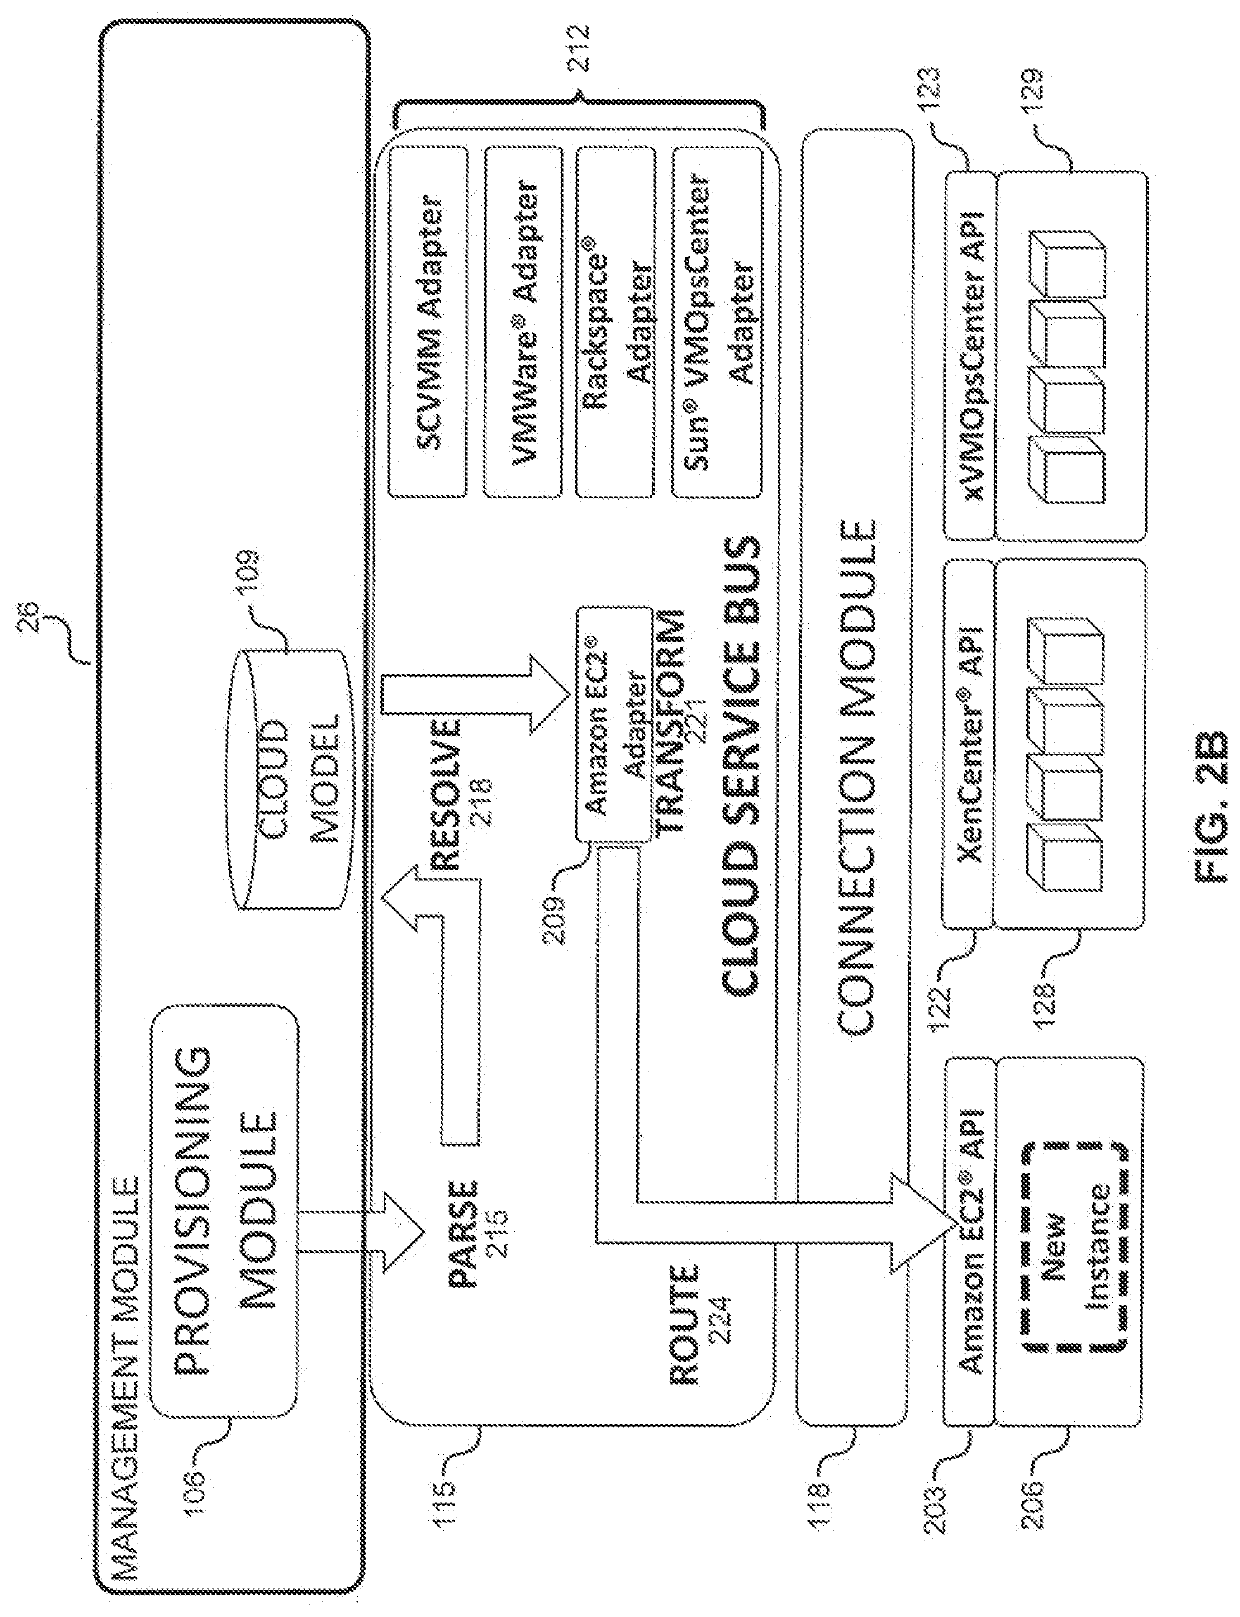 System and method for a cloud computing abstraction layer